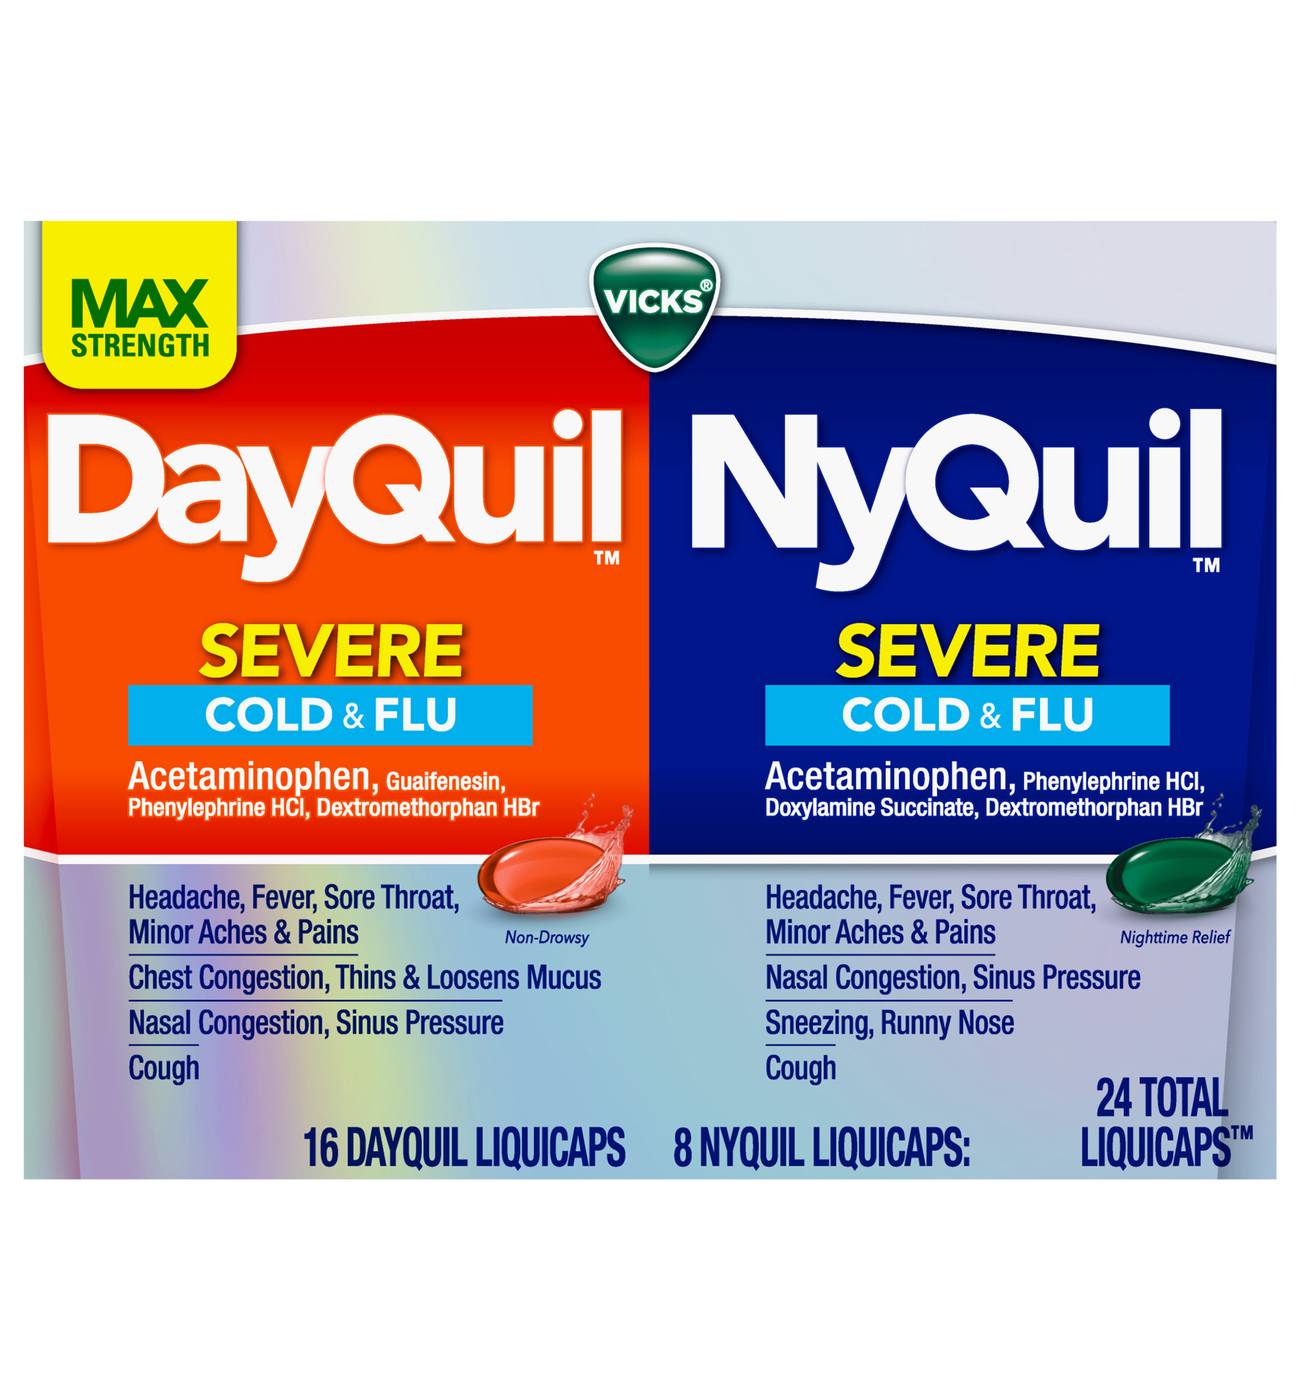 Vicks DayQuil + NyQuil SEVERE Cold & Flu Combo Pack; image 1 of 9